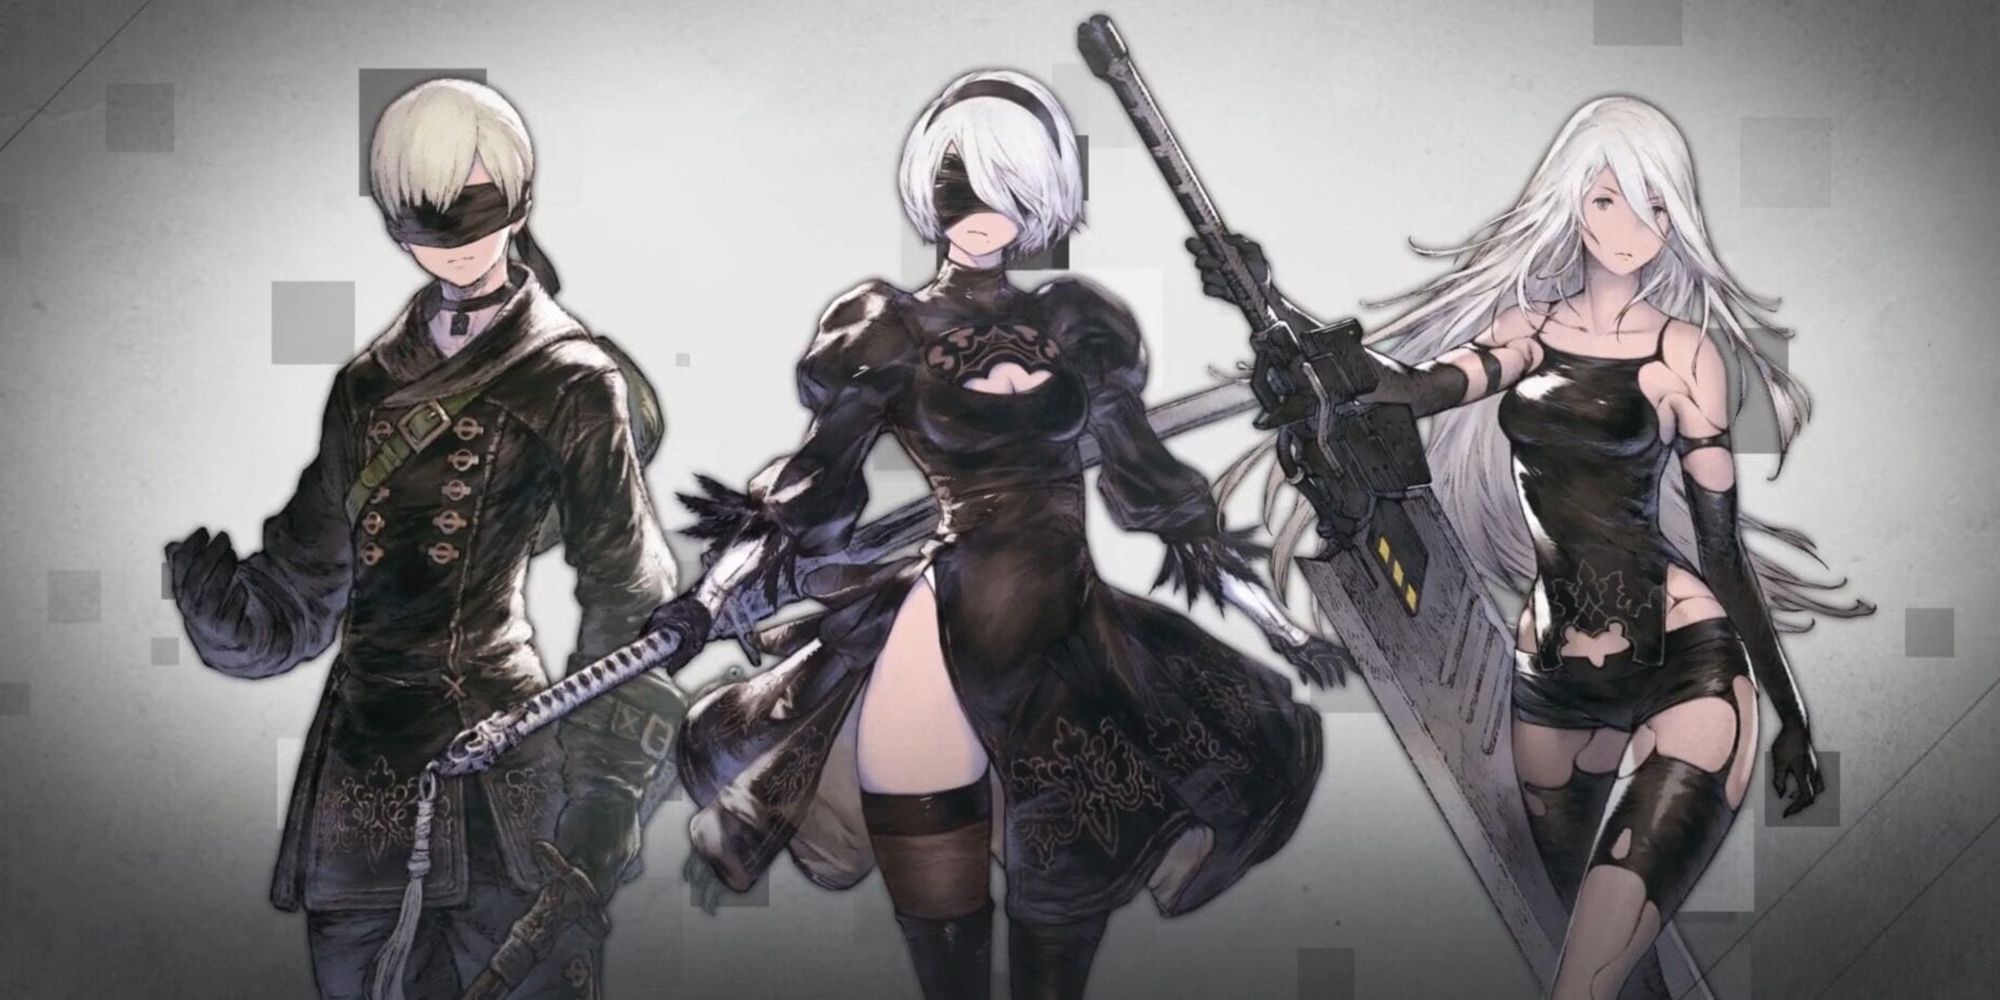 Nier Automata - The Three Main Playable Cast Members A2, 2B, and 9S